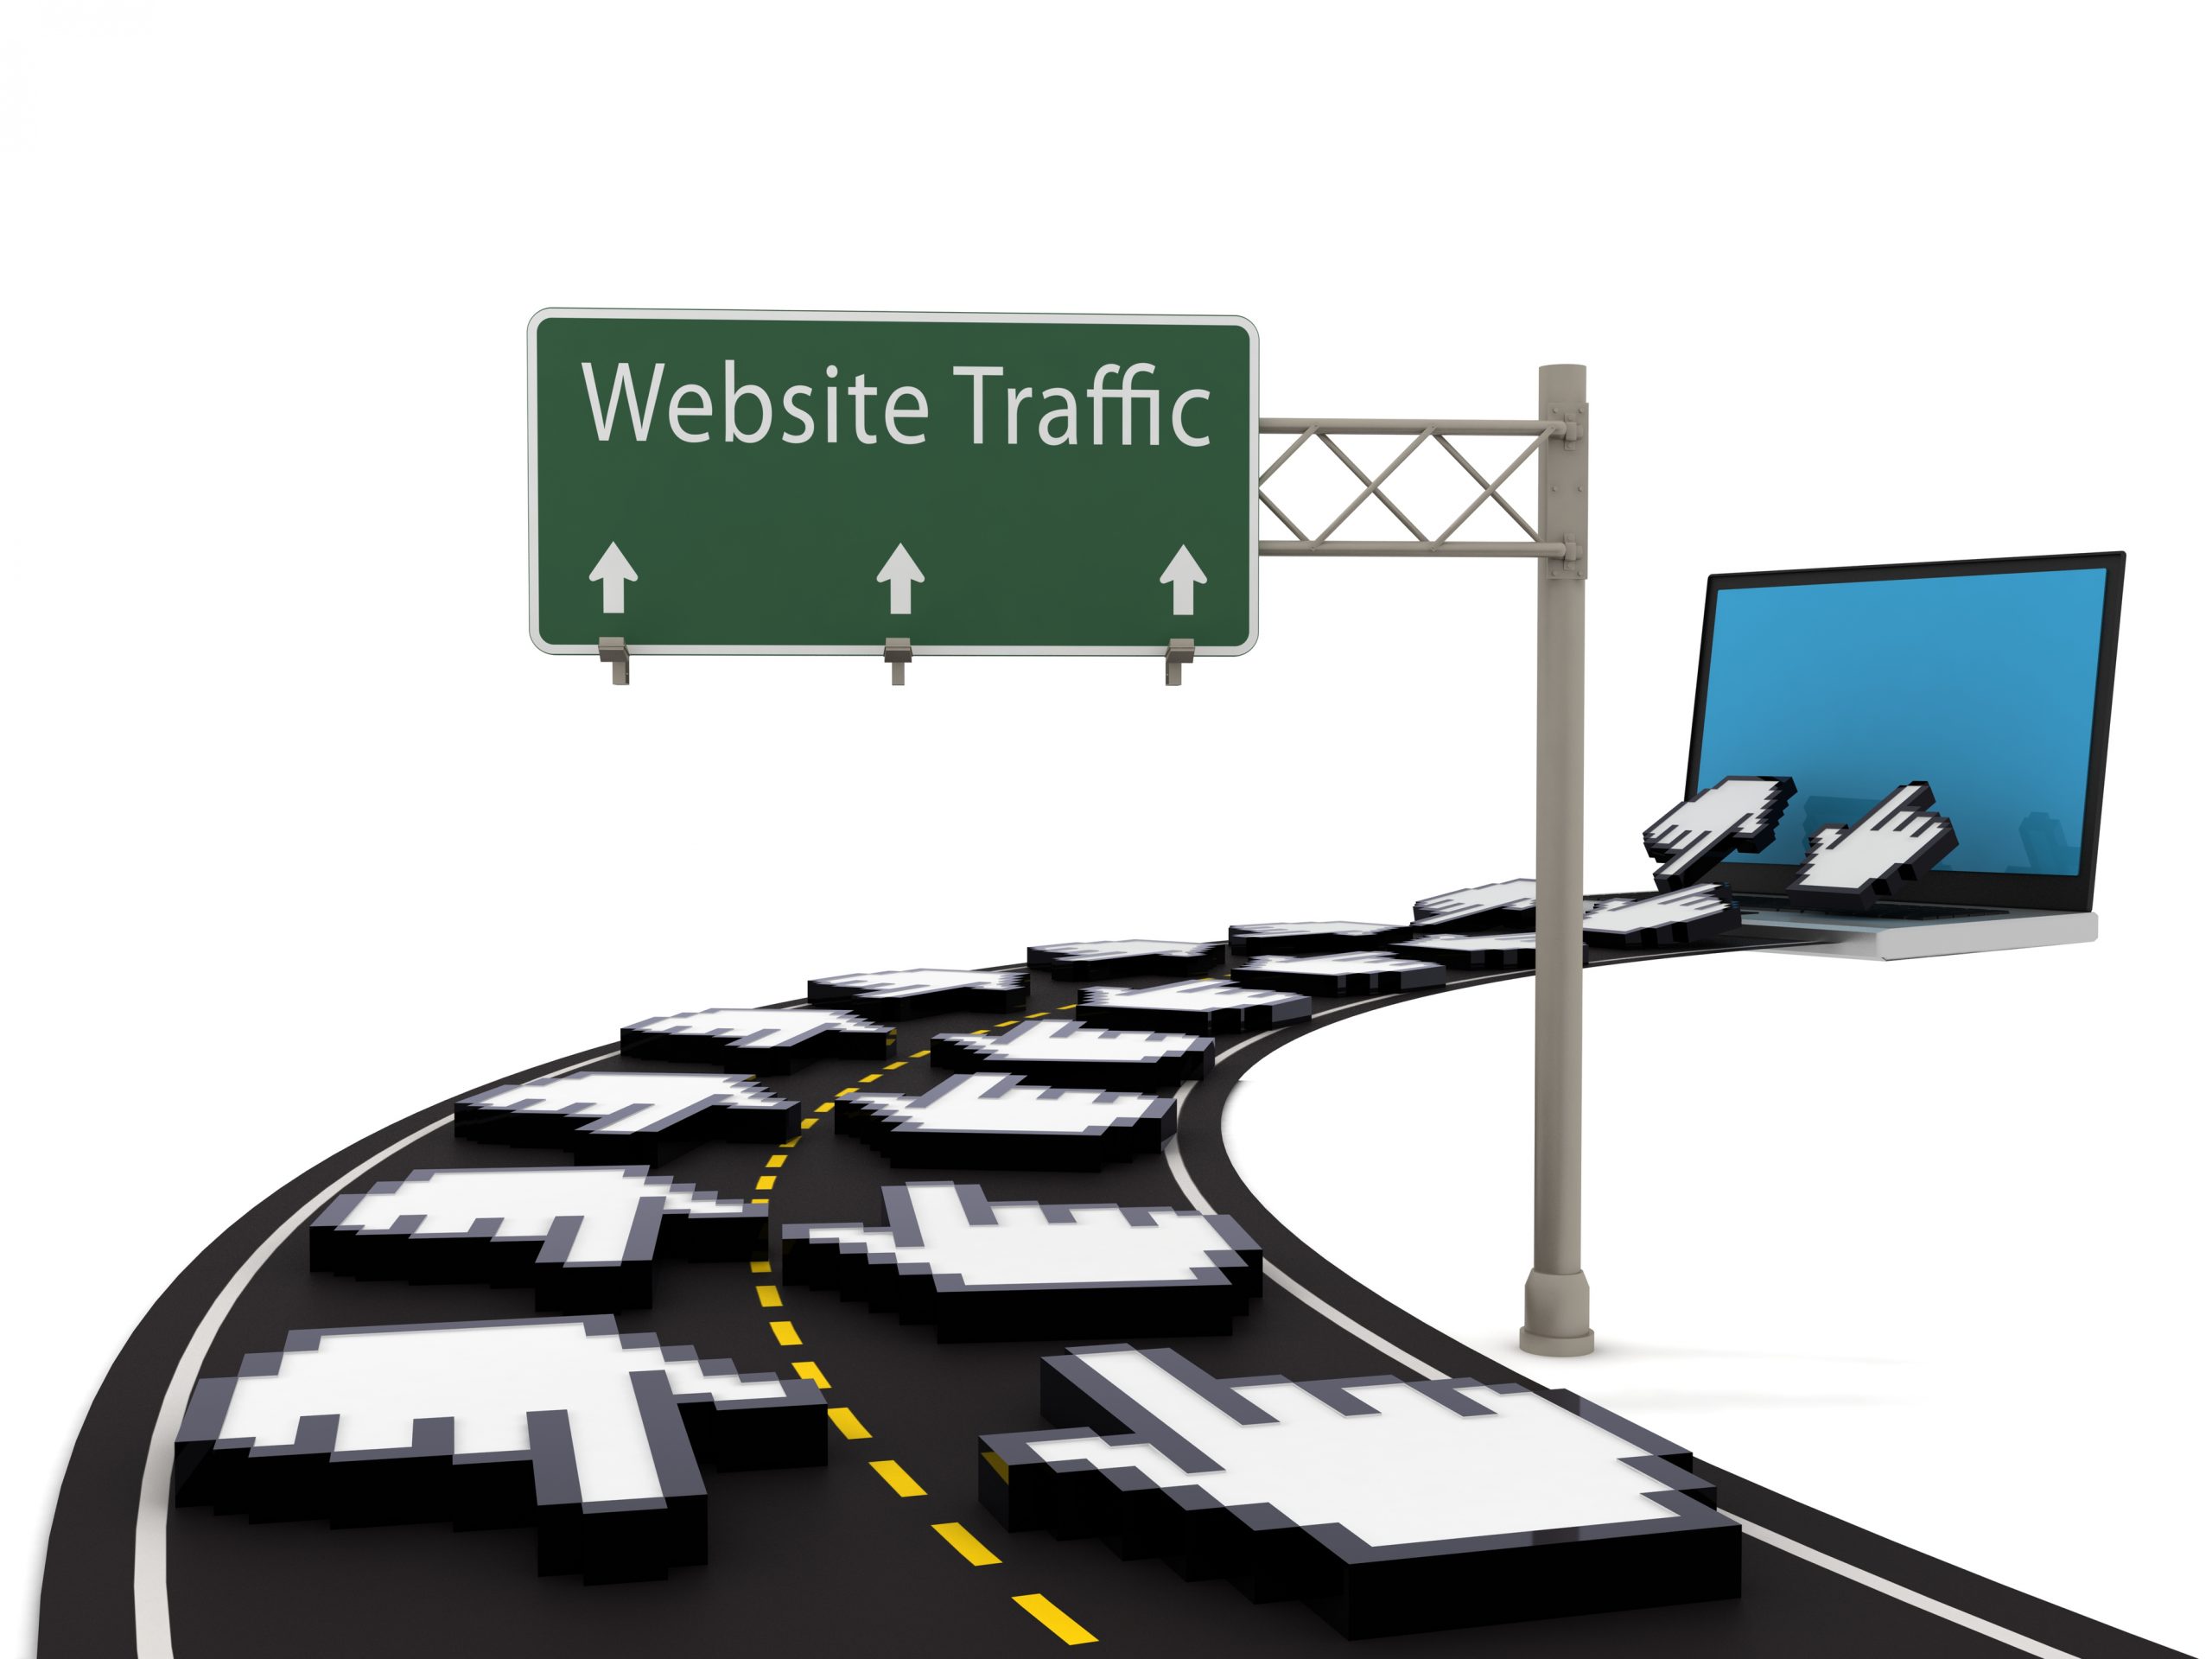 Traffic: It's Important to Attract the Right Visitors